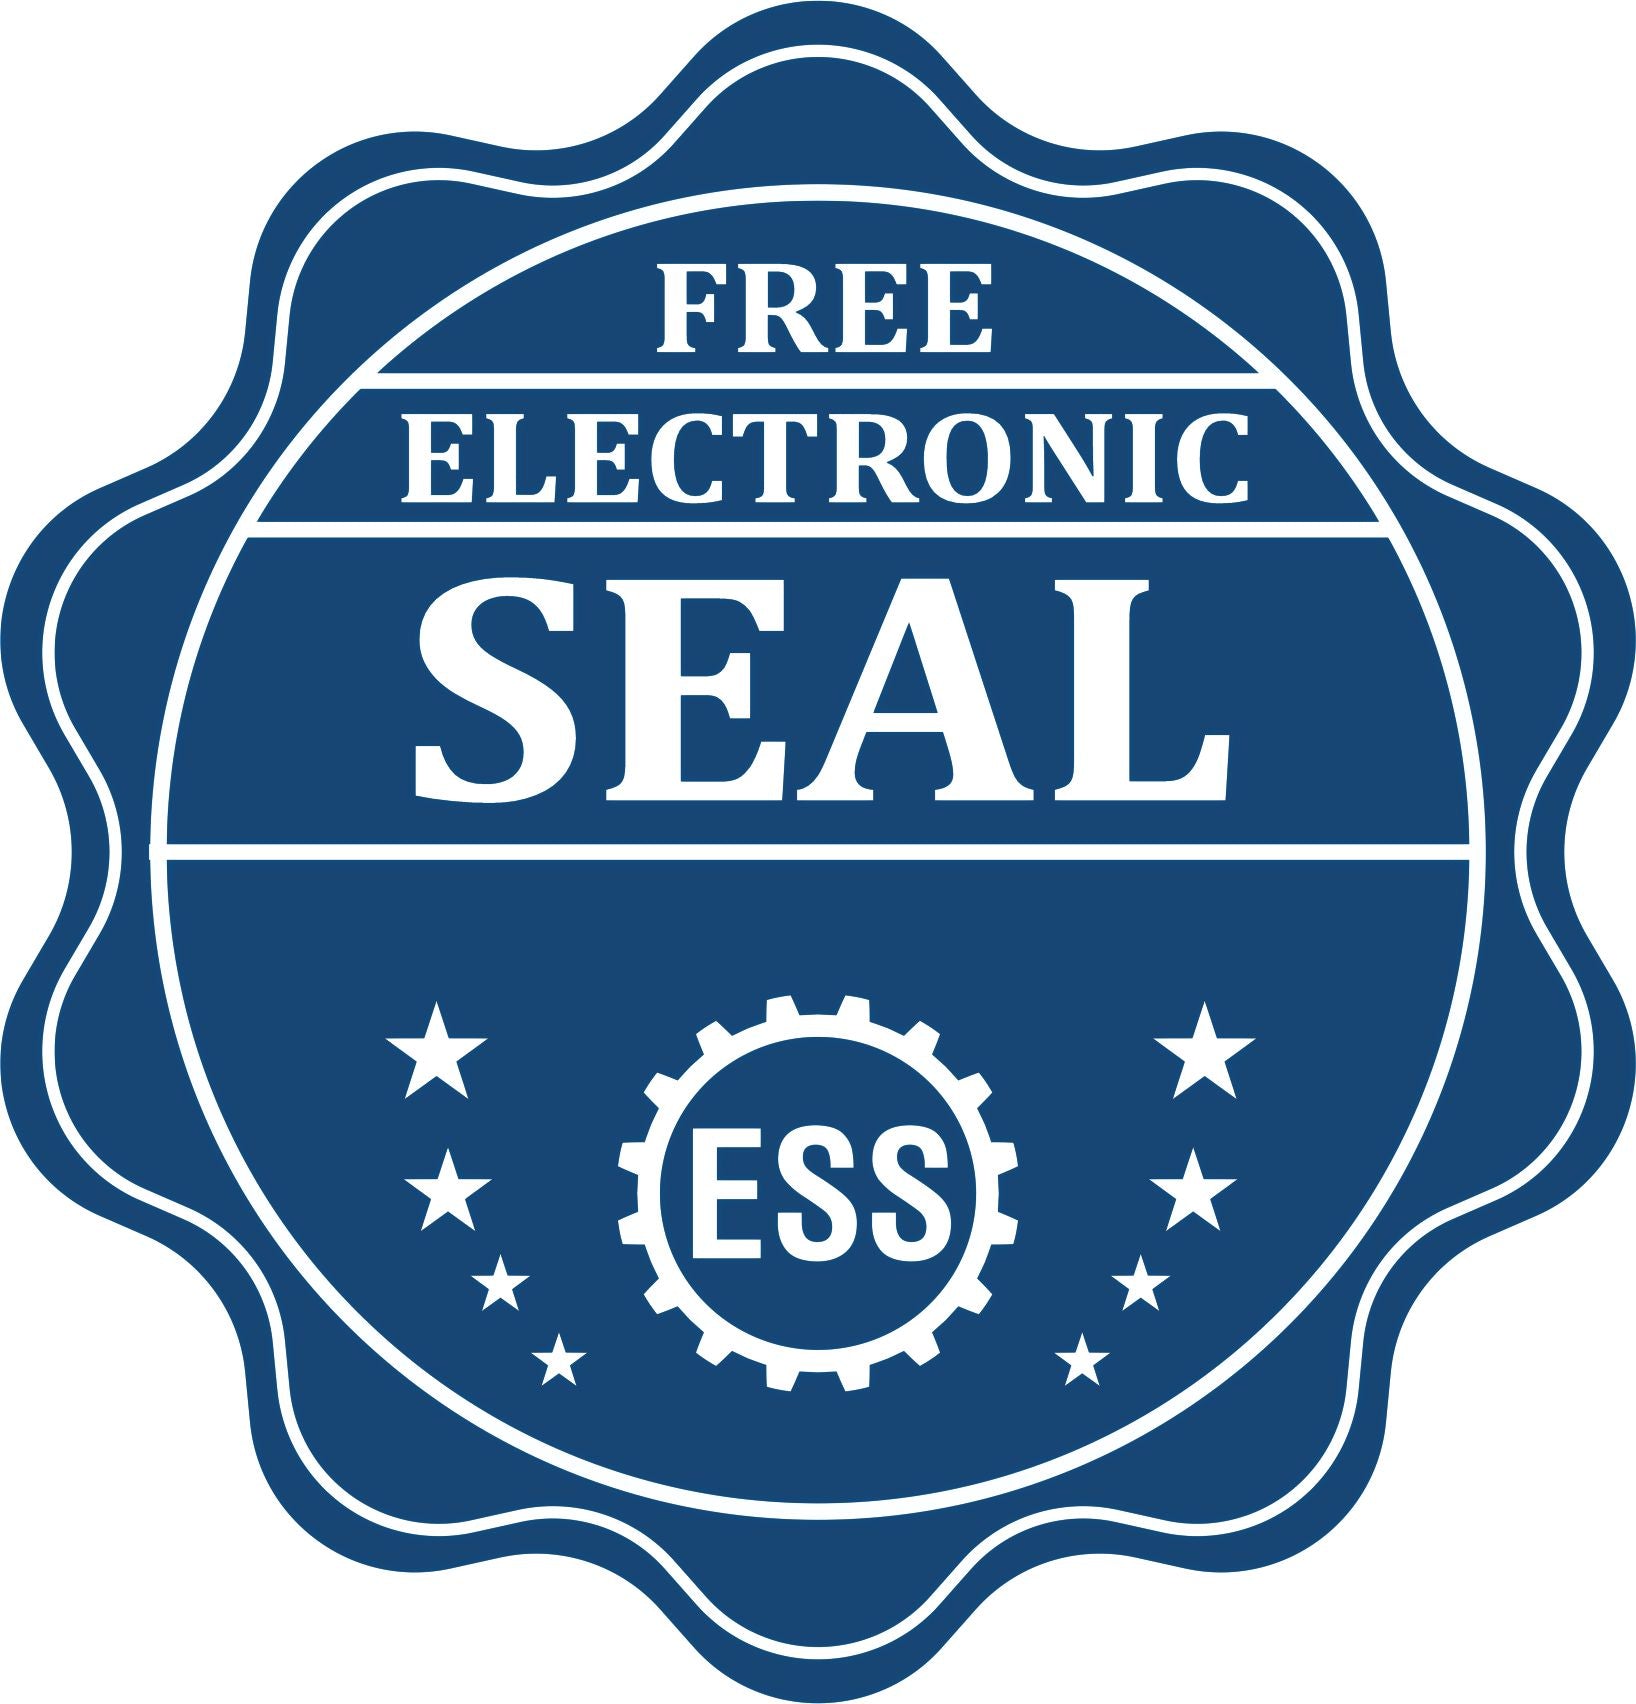 A badge showing a free electronic seal for the Wooden Handle Ohio State Seal Notary Public Stamp with stars and the ESS gear on the emblem.